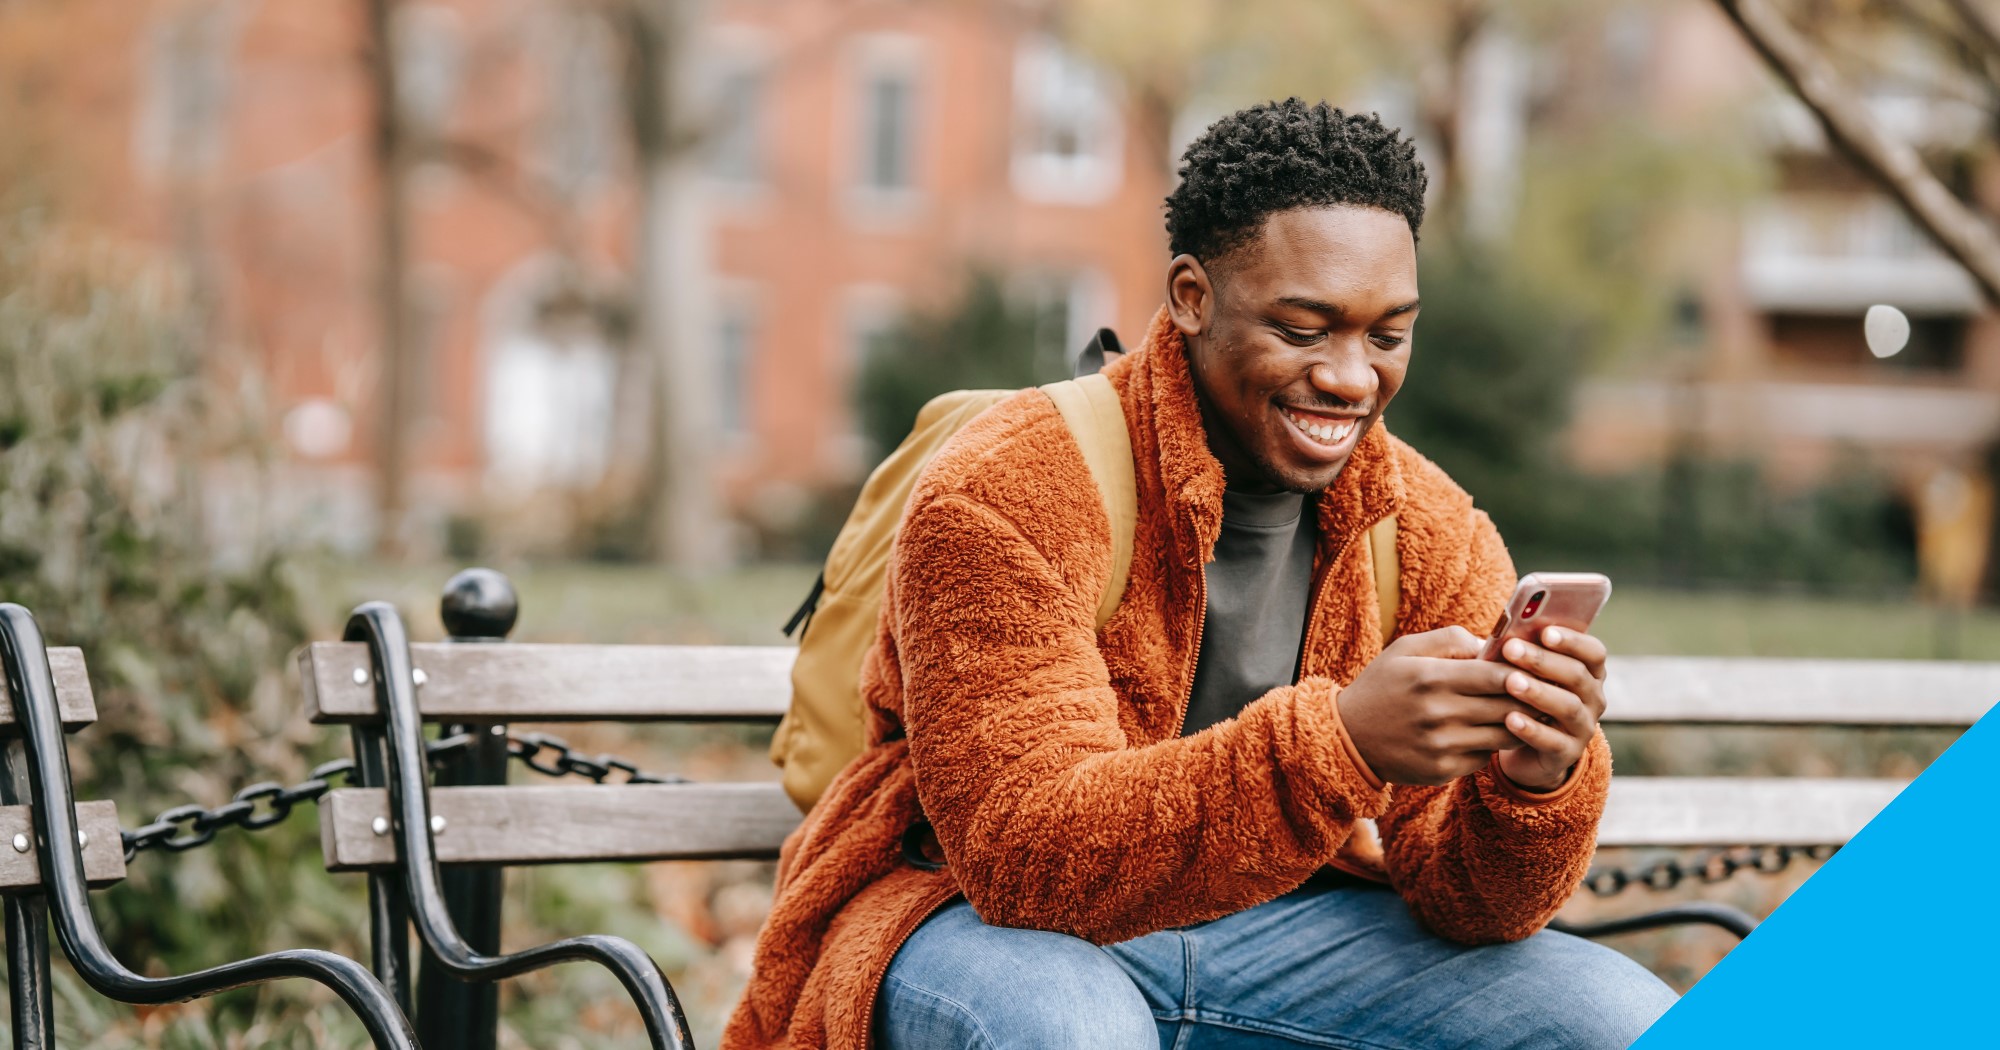 Black male smiling and looking at his phone